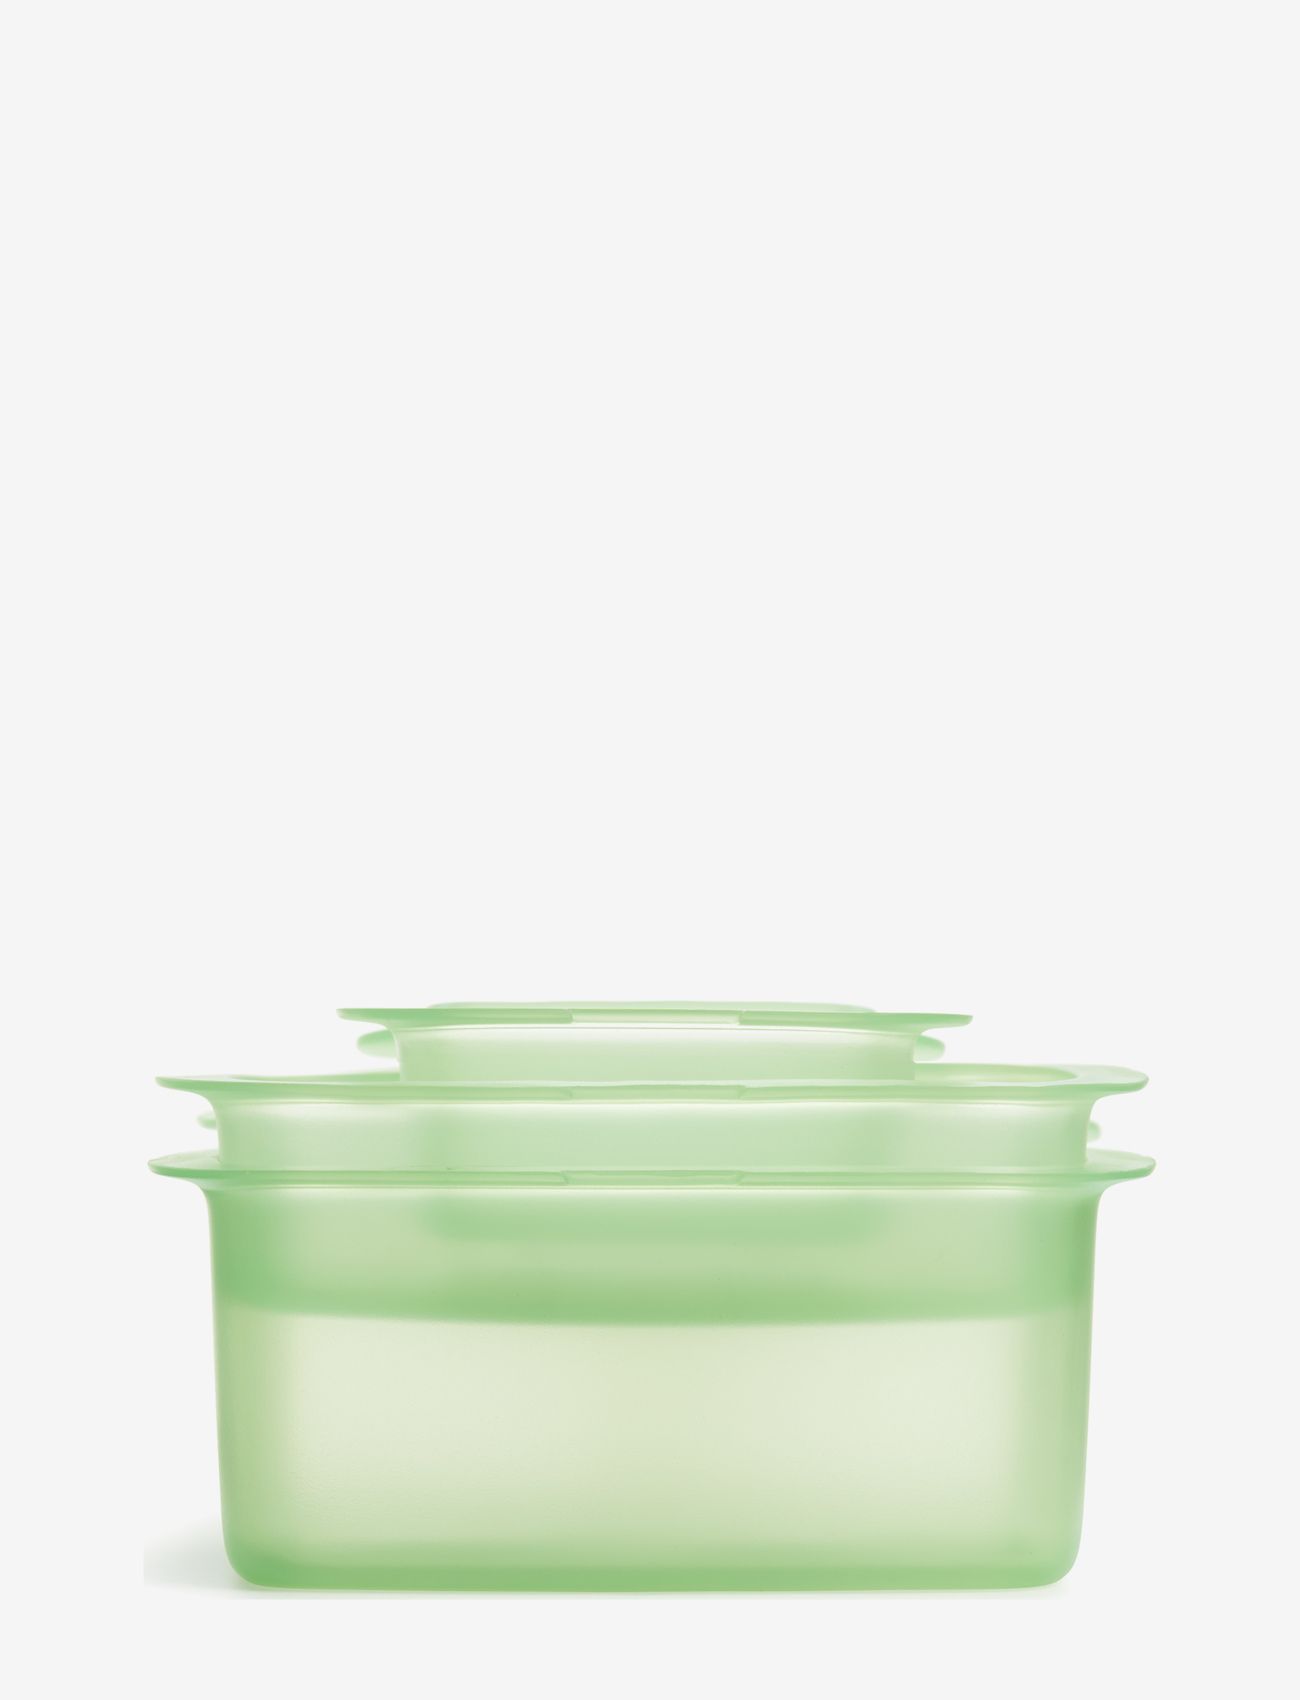 Lekué - Set 3 reusable silicone boxes - lowest prices - green - 1